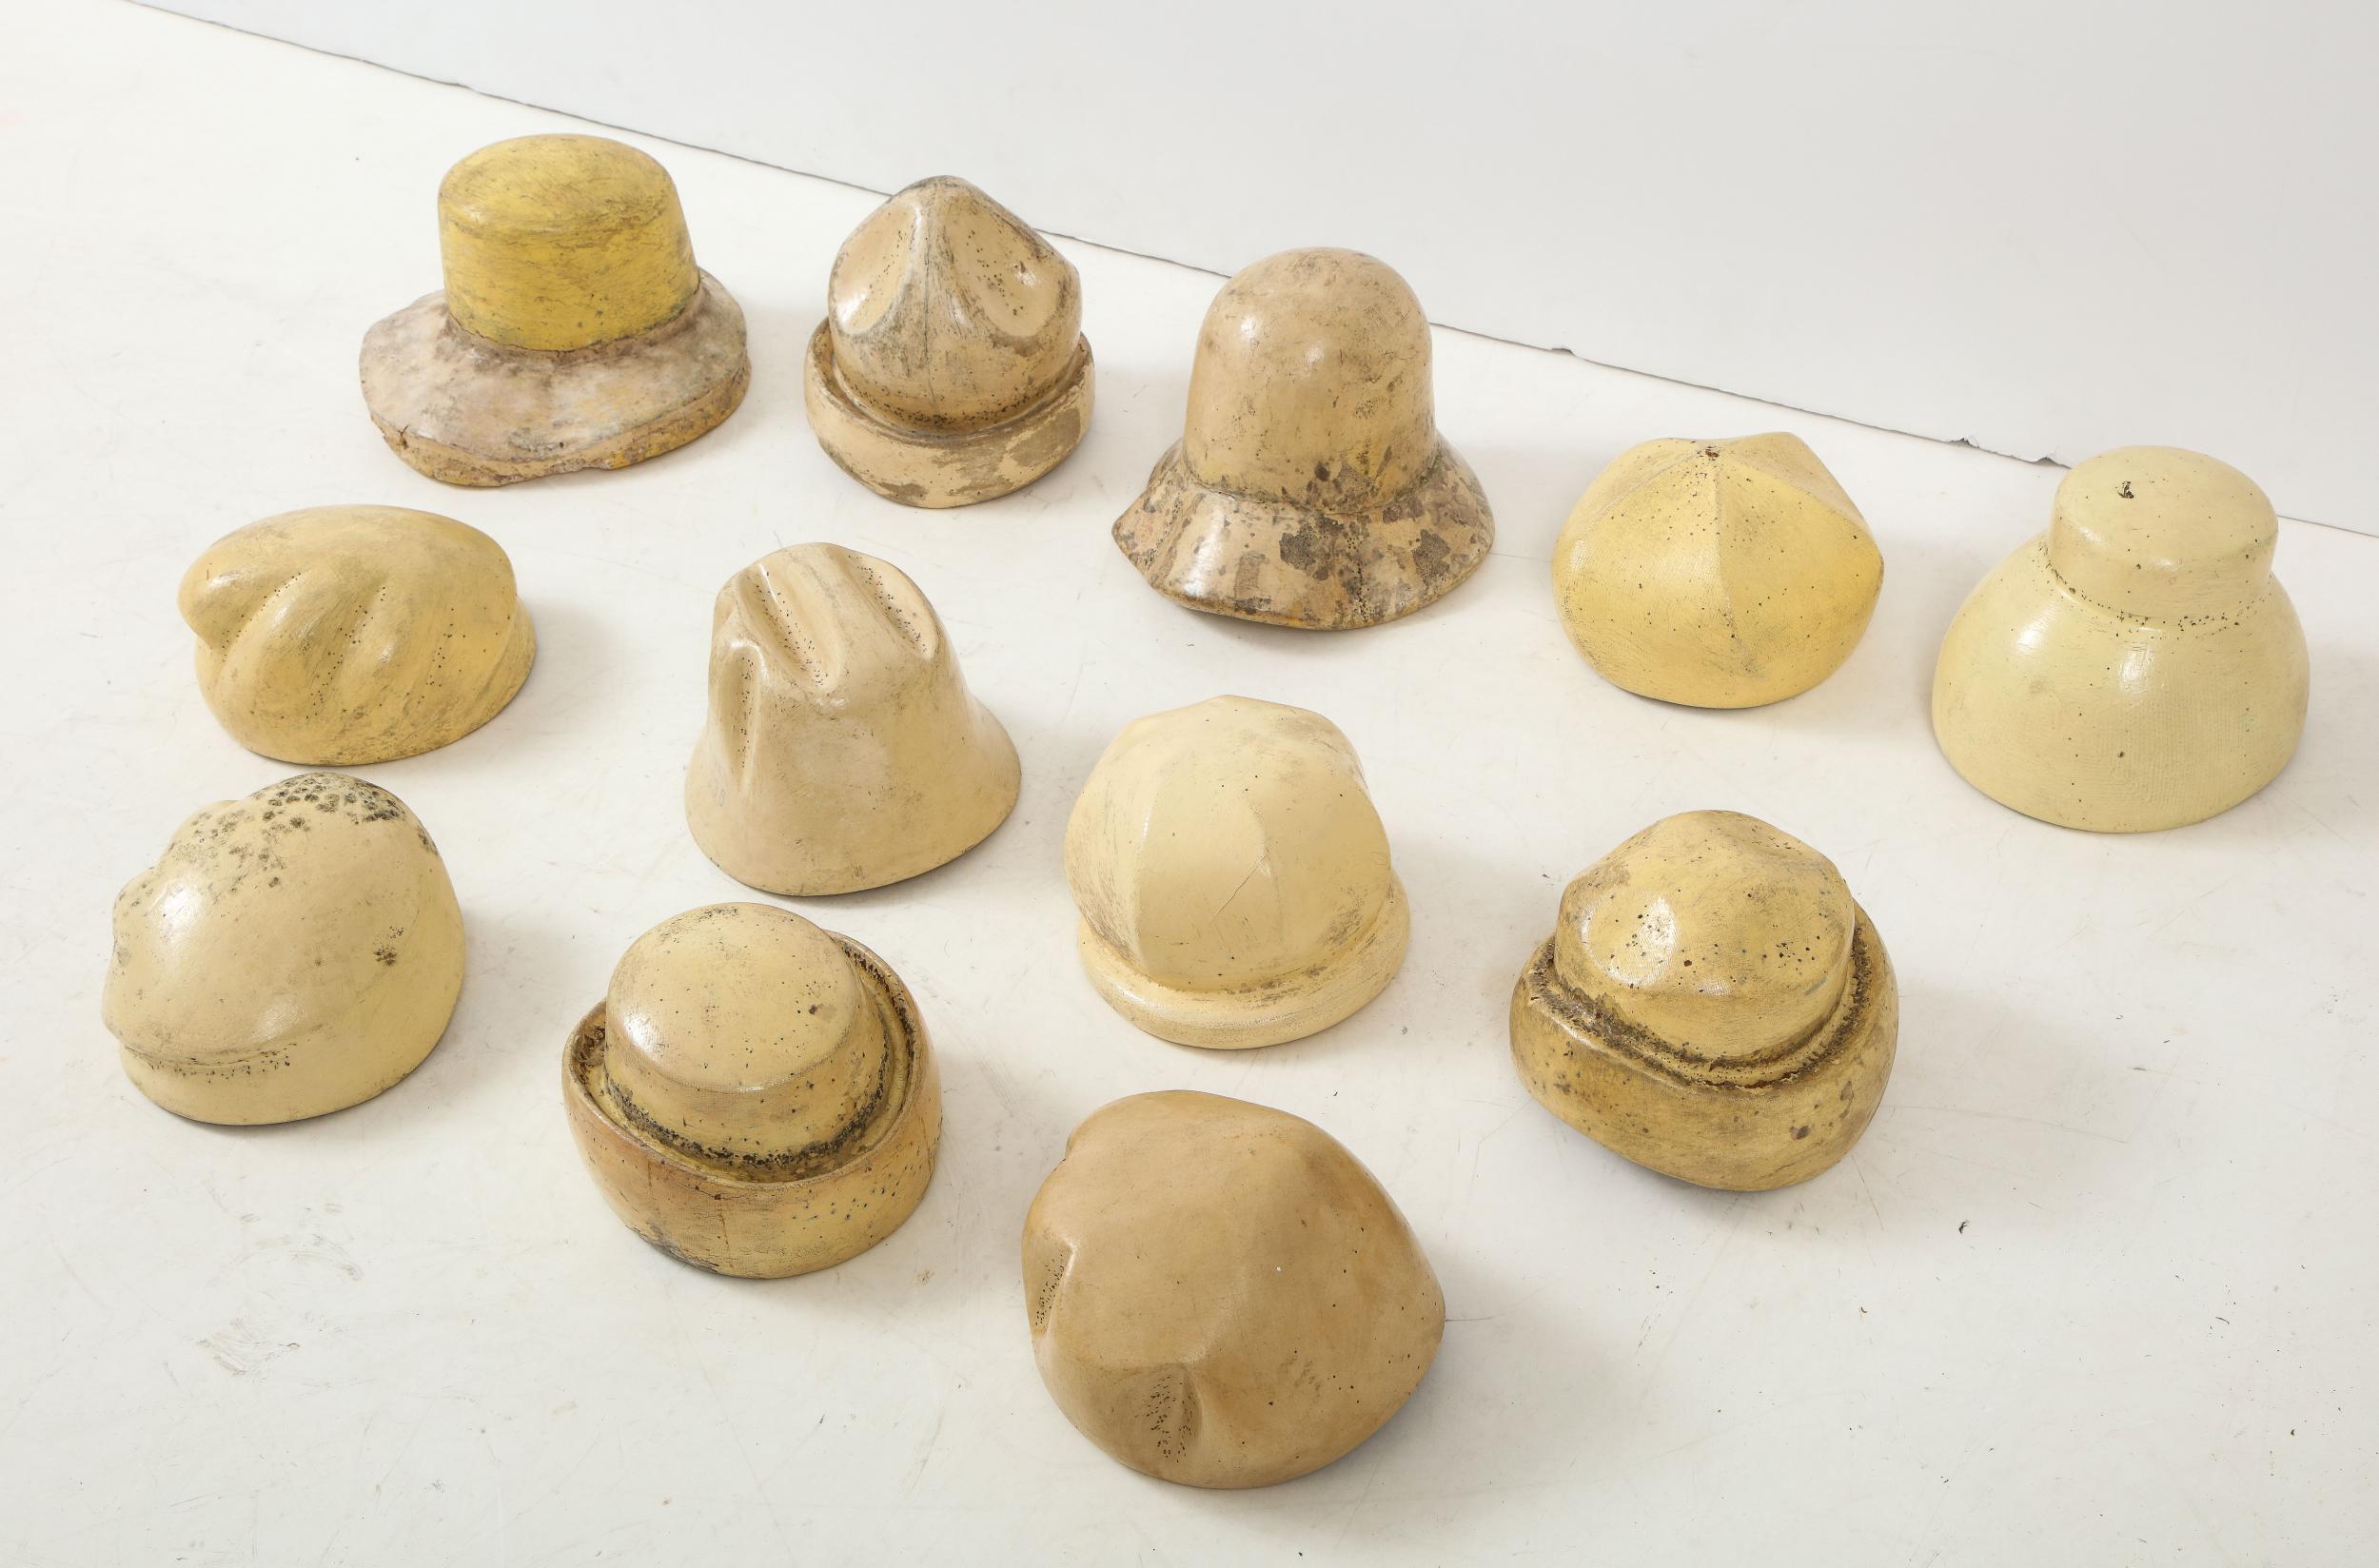 Set of 12 vintage French wood hat molds. Twelve different styles of classic French headpieces from Ebra like a cloche, bowler, pillbox, and more. These authentic hat molds have wear consistent with pin placement during use. Early 20th century. The